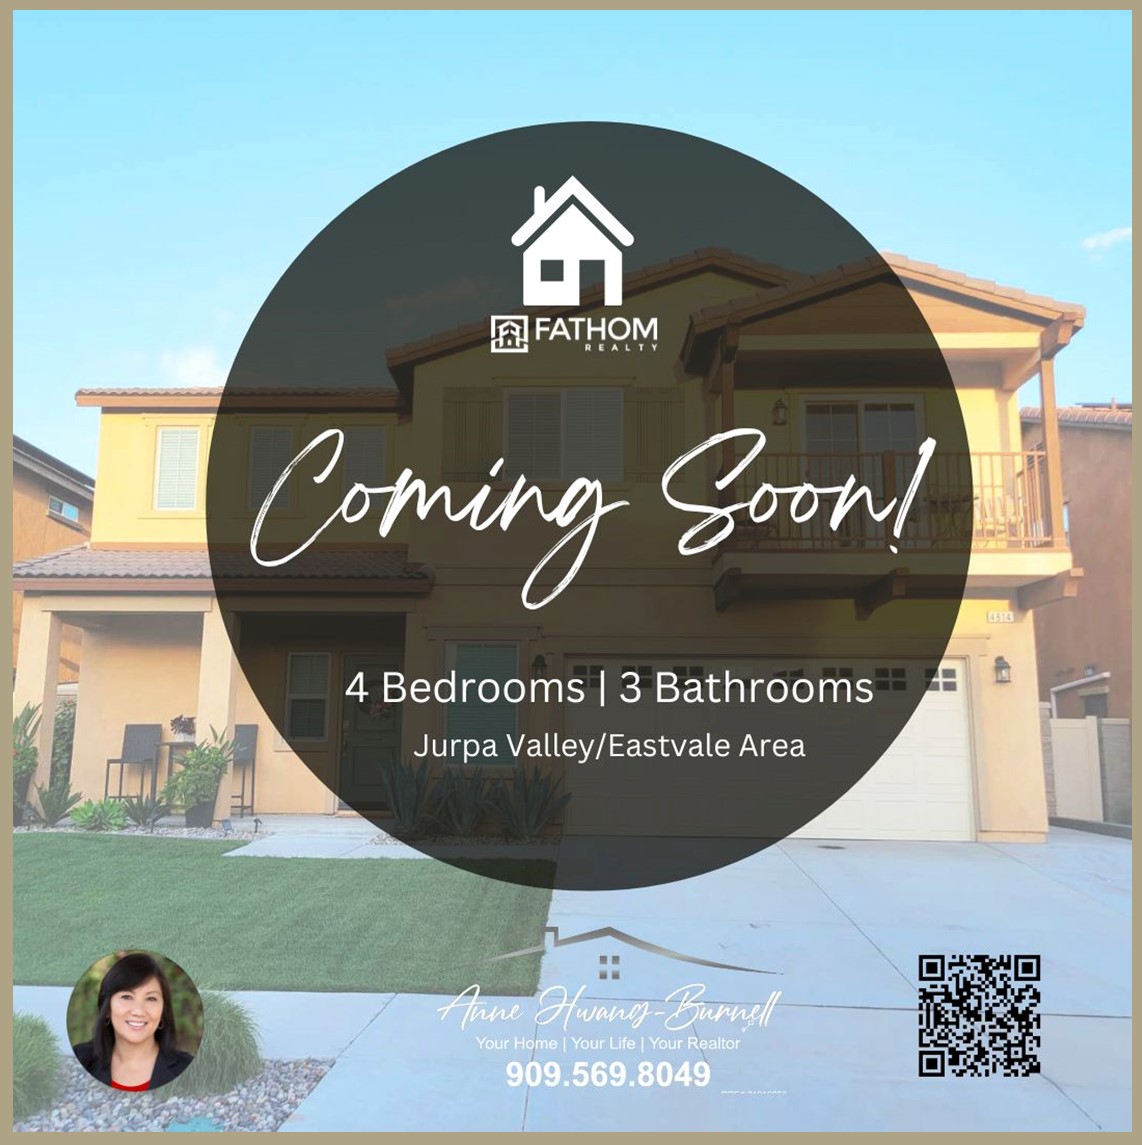 🏡 Coming Soon! 
Get ready to fall in love with this gorgeous turn-key home with tons of upgrades. Featuring 1 bedroom and full bath downstairs, it's perfect for modern living. Stay tuned for more details! 

california-houses.com

#annehwangburnellrealtor